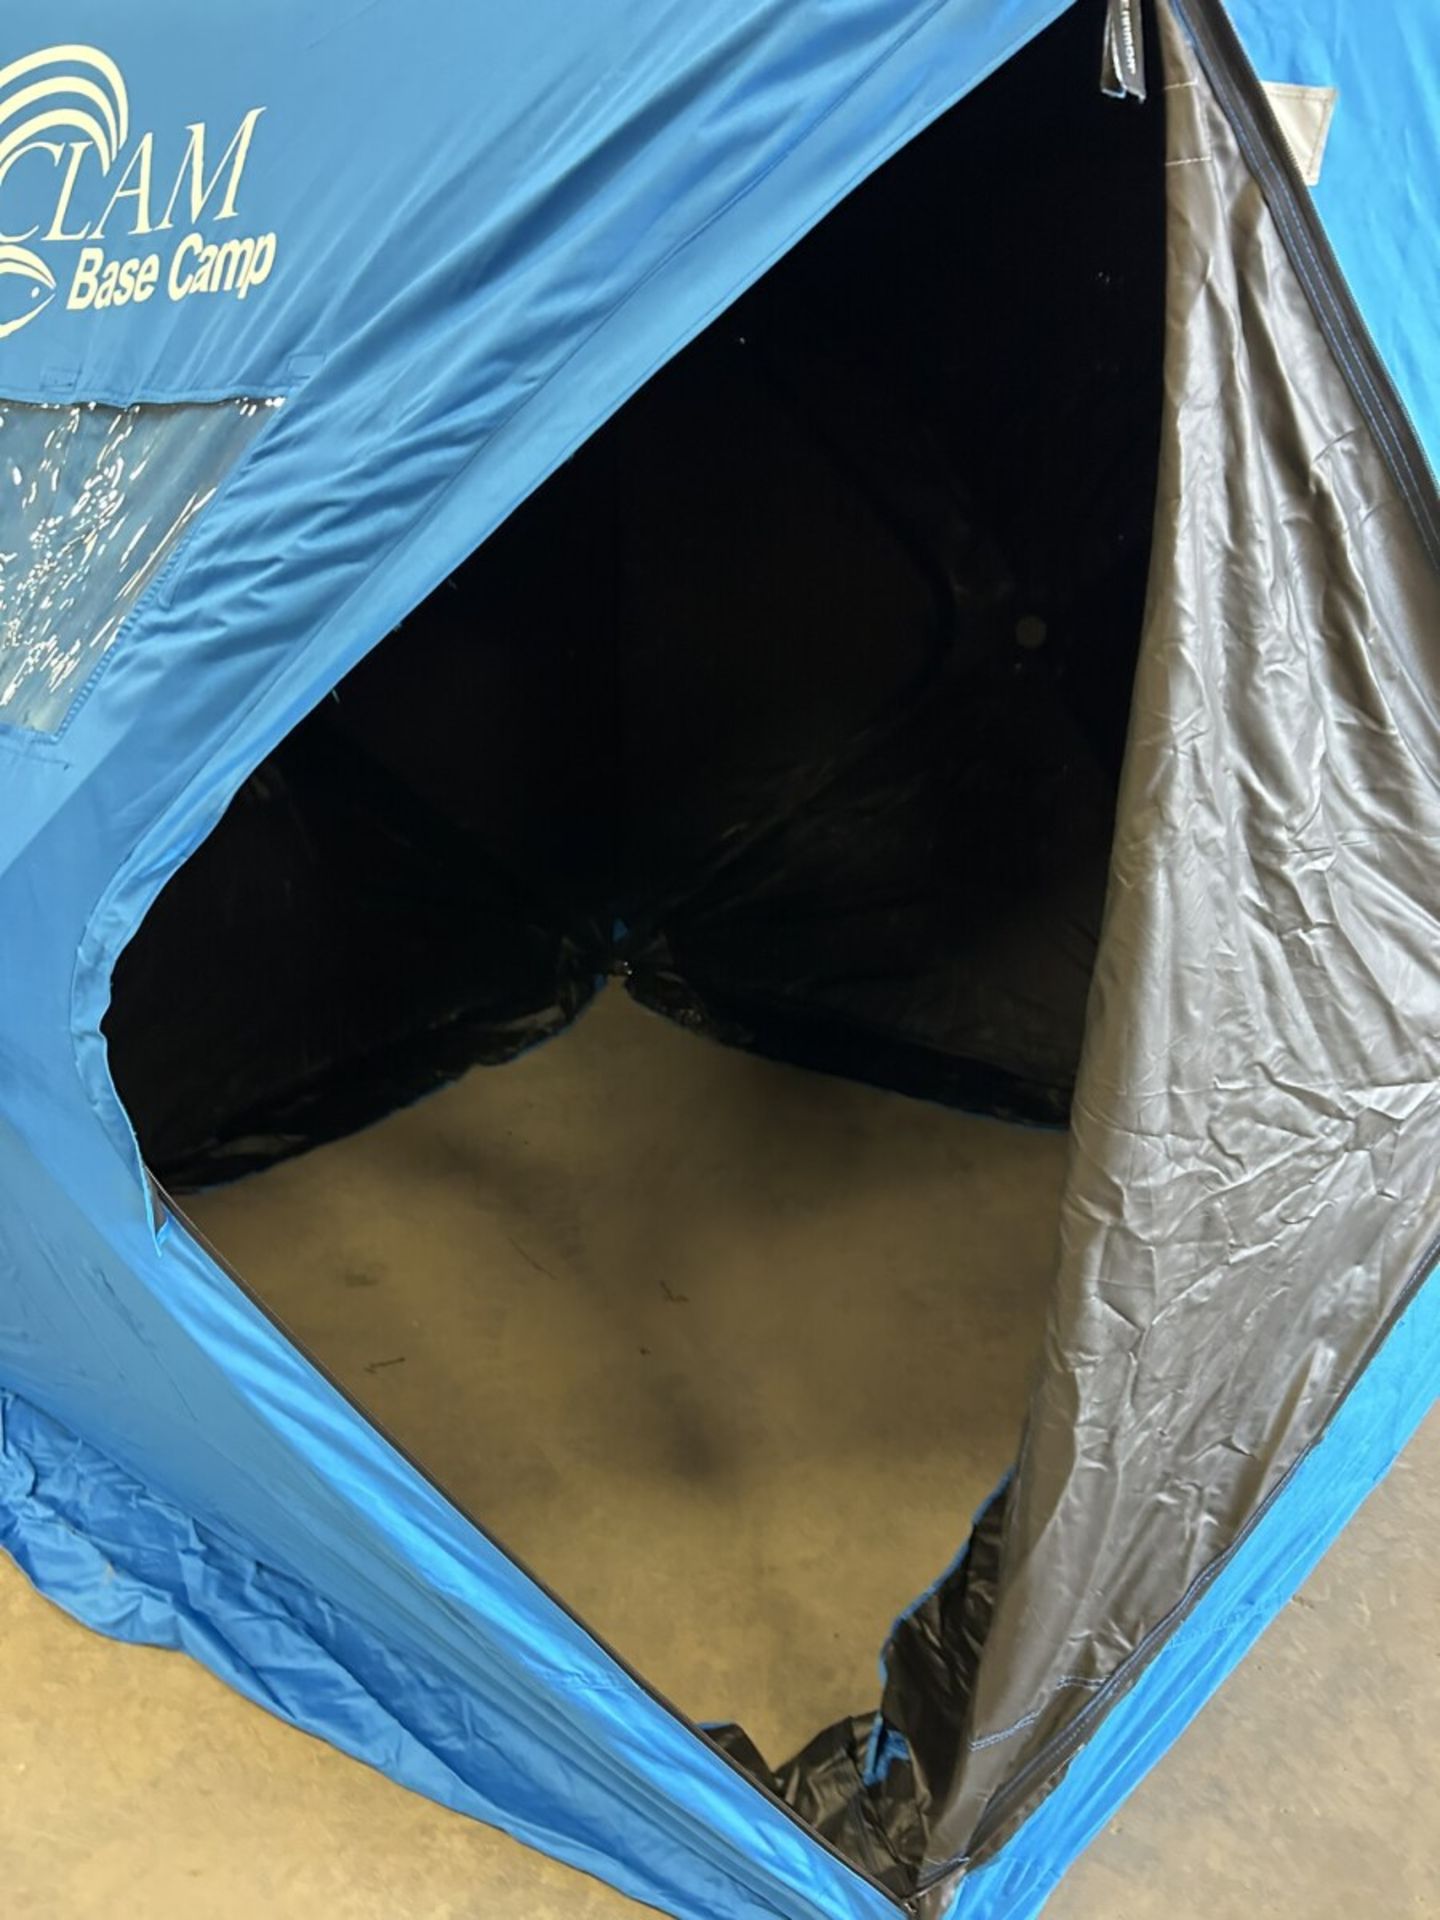 BASE CAMP COLLAPSIBLE ICE FISHING TENT - Image 5 of 8